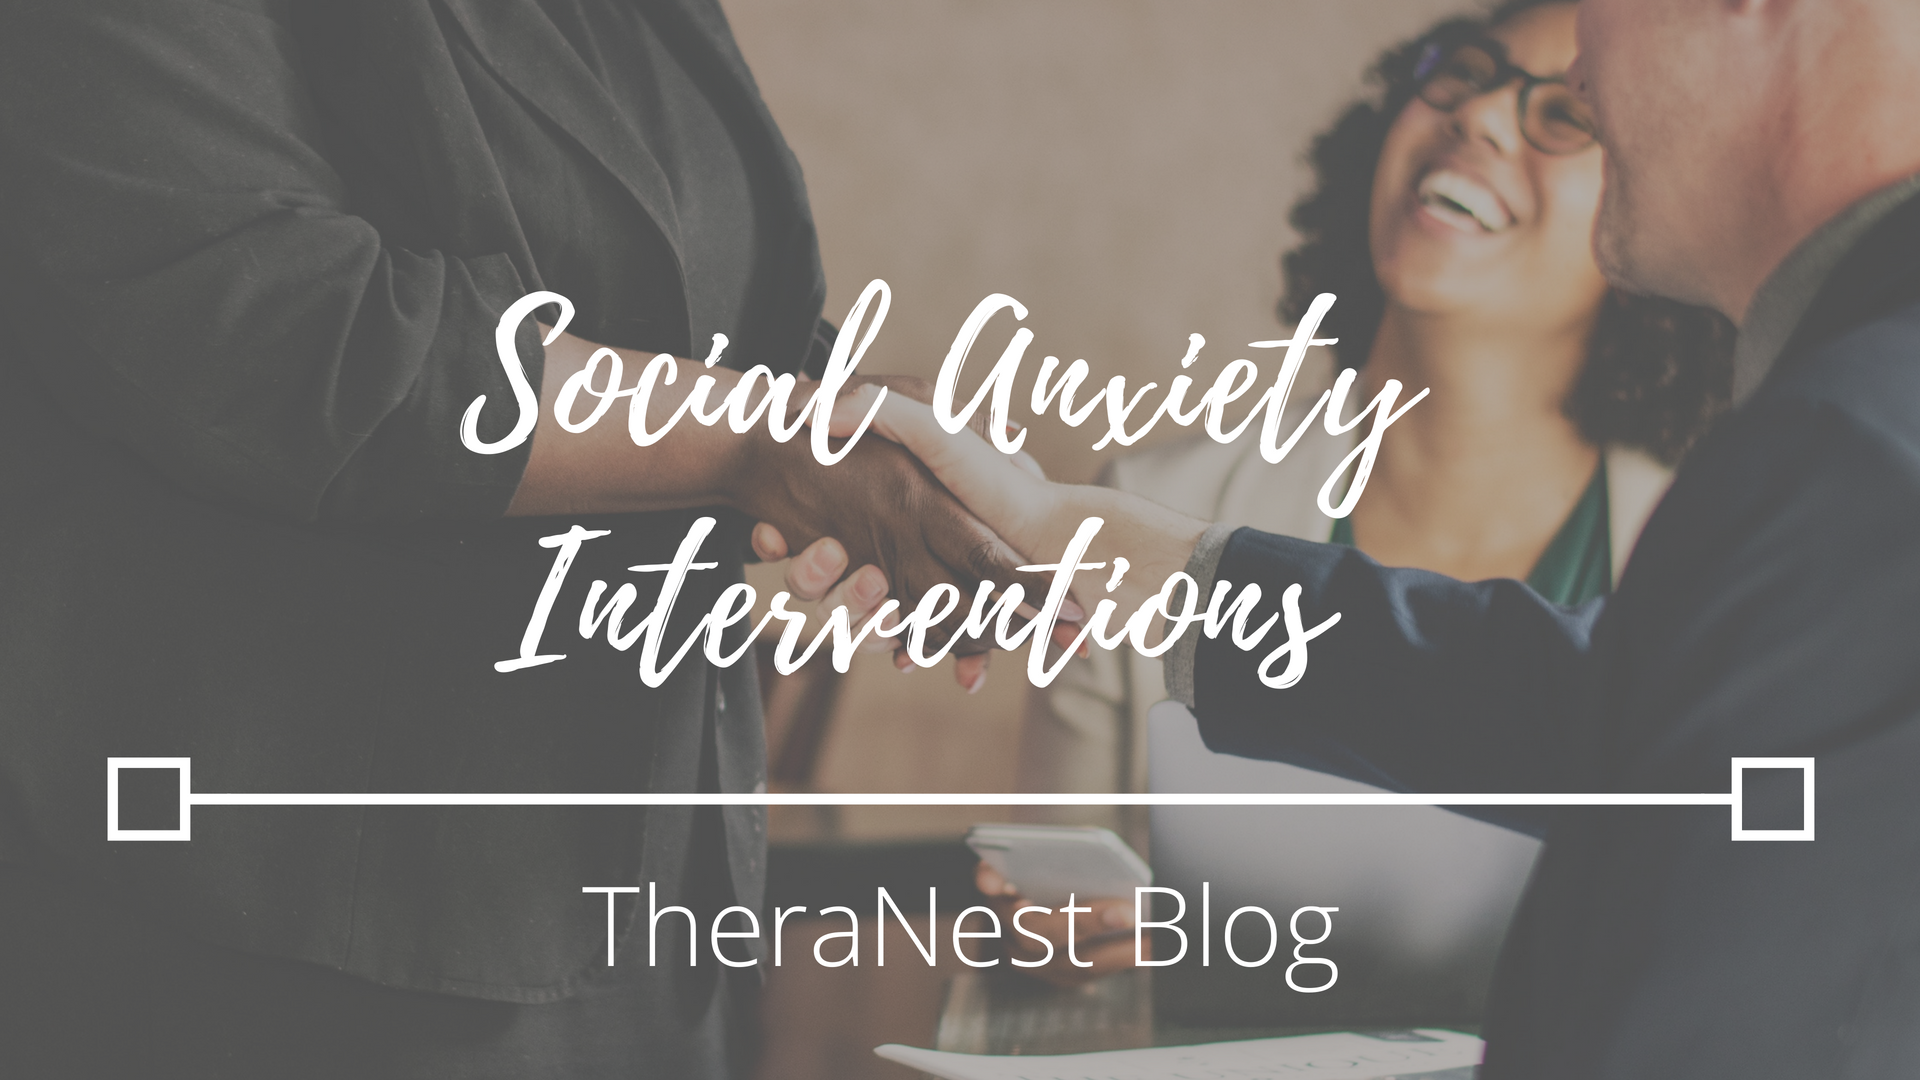 Social Anxiety Interventions - TheraNest Blog